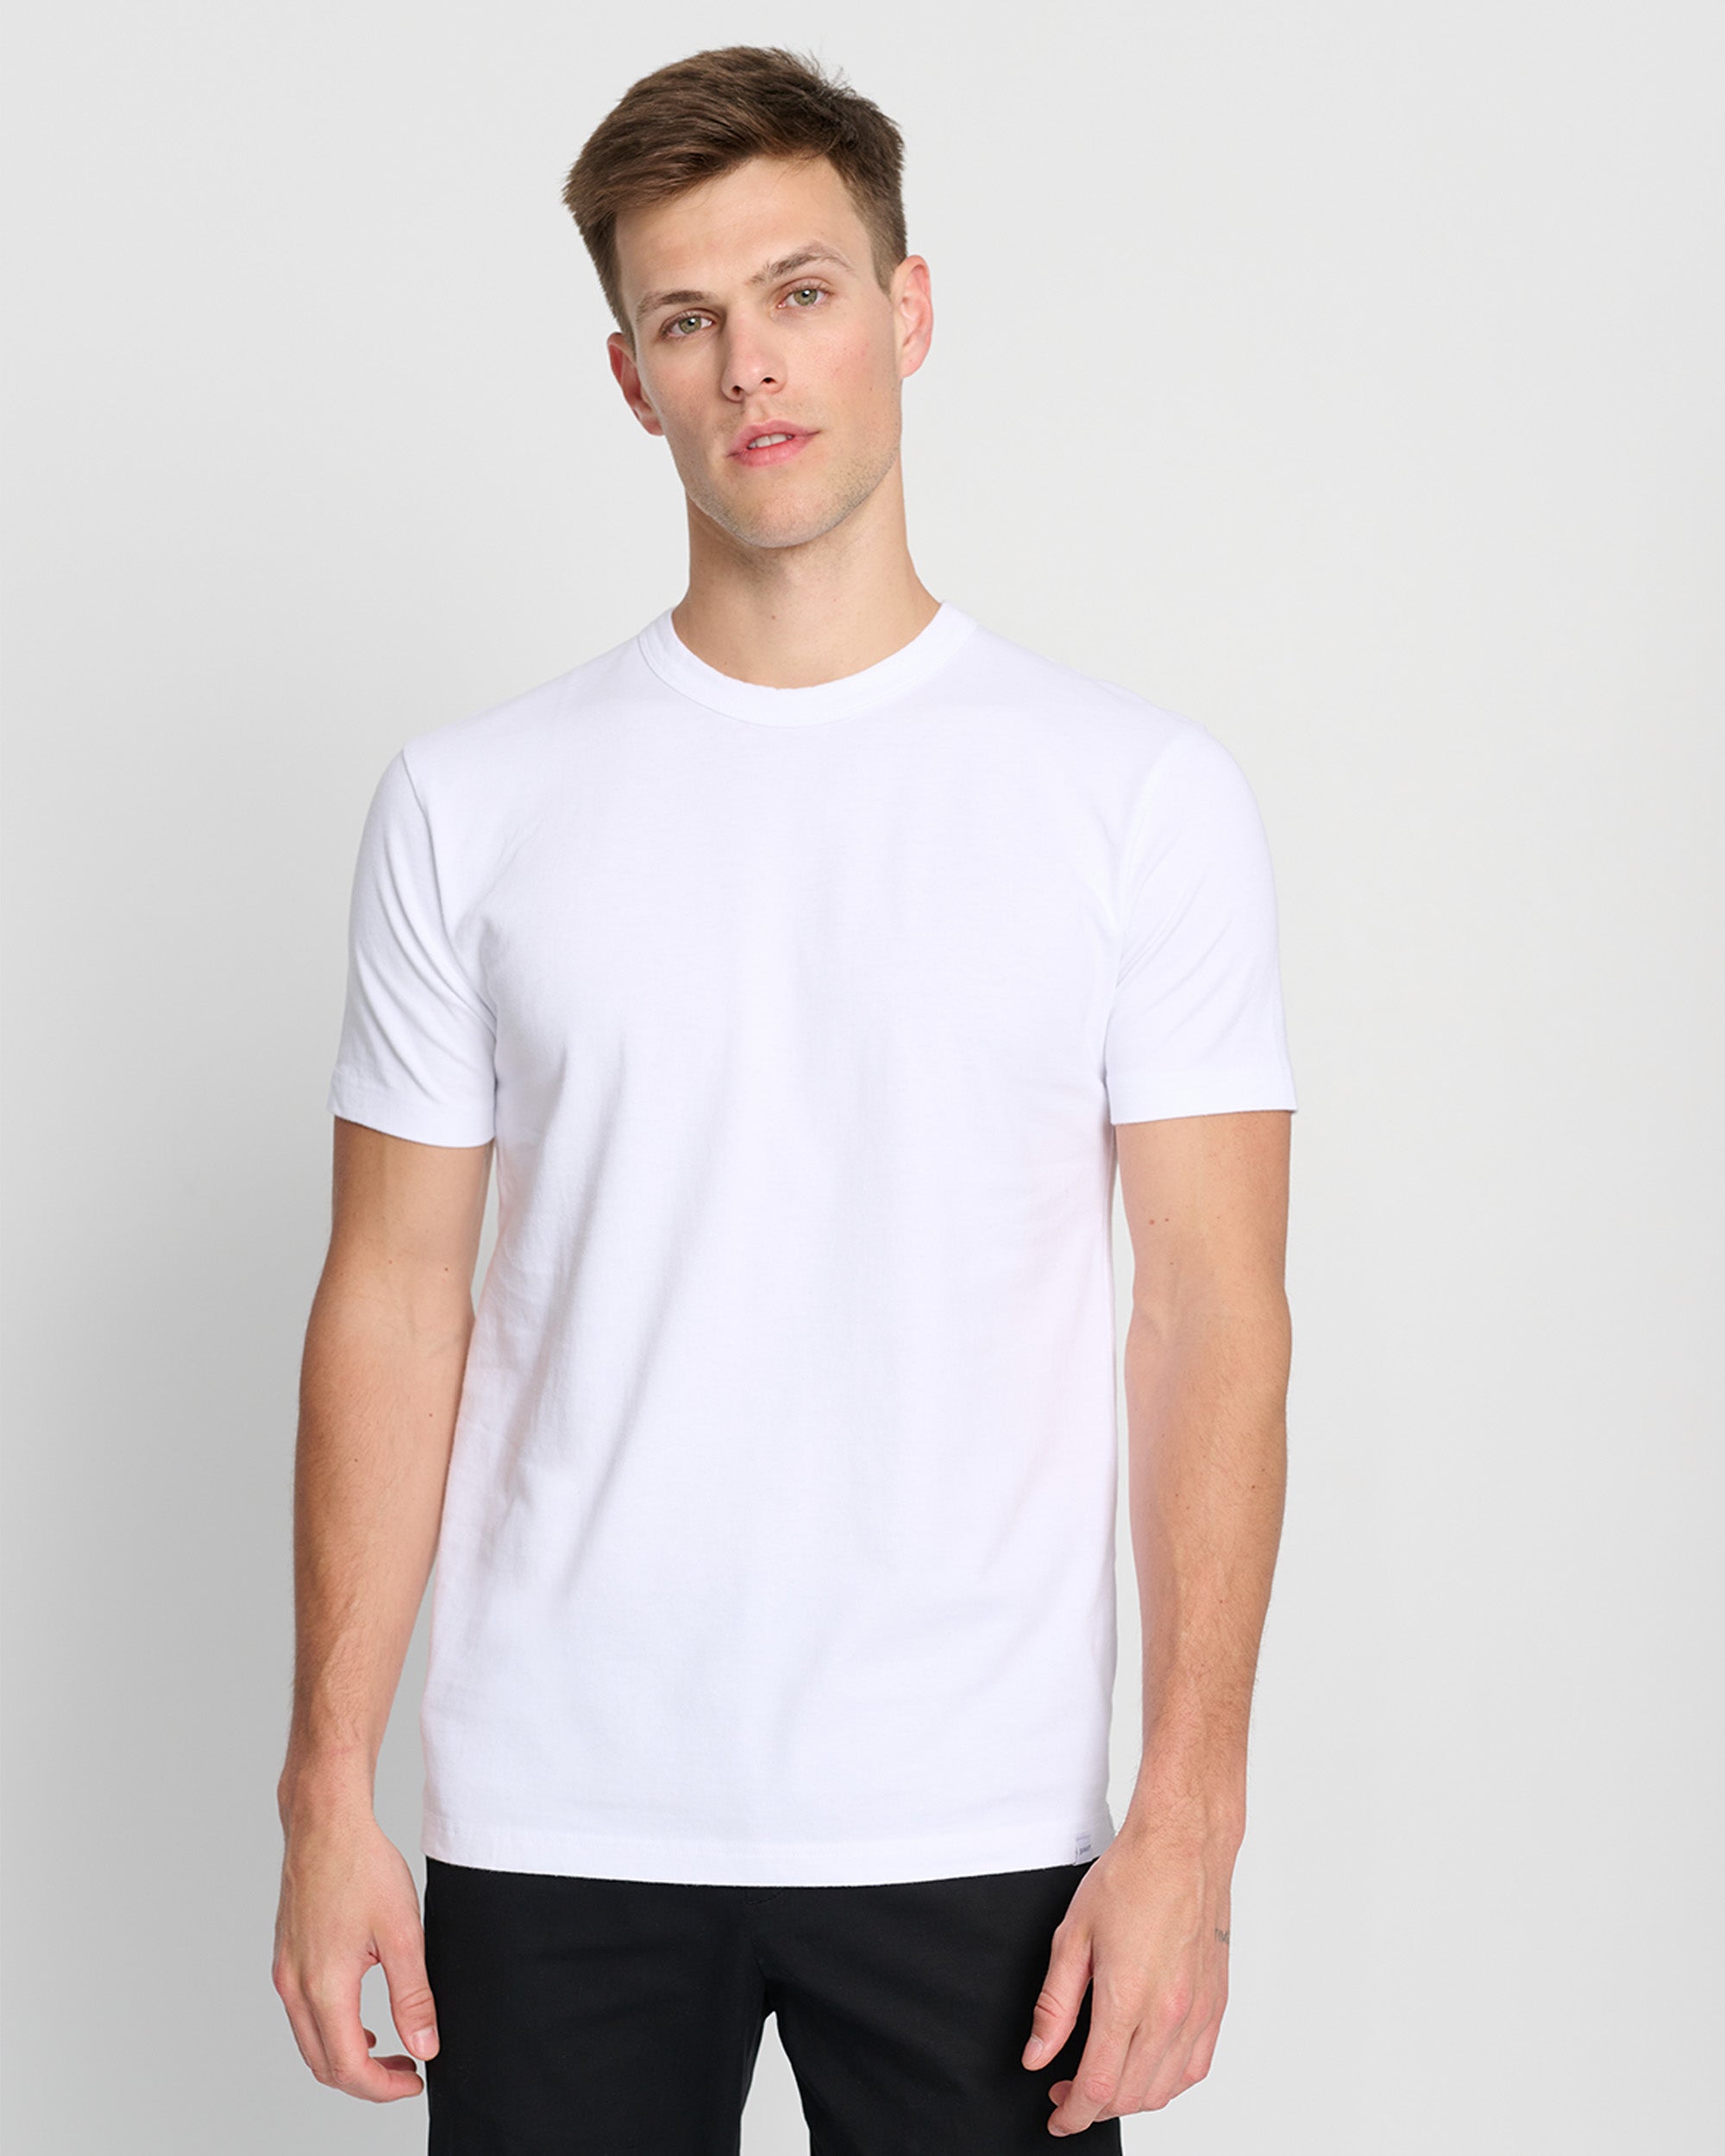 White round neck t-shirts male isolated Royalty Free Vector